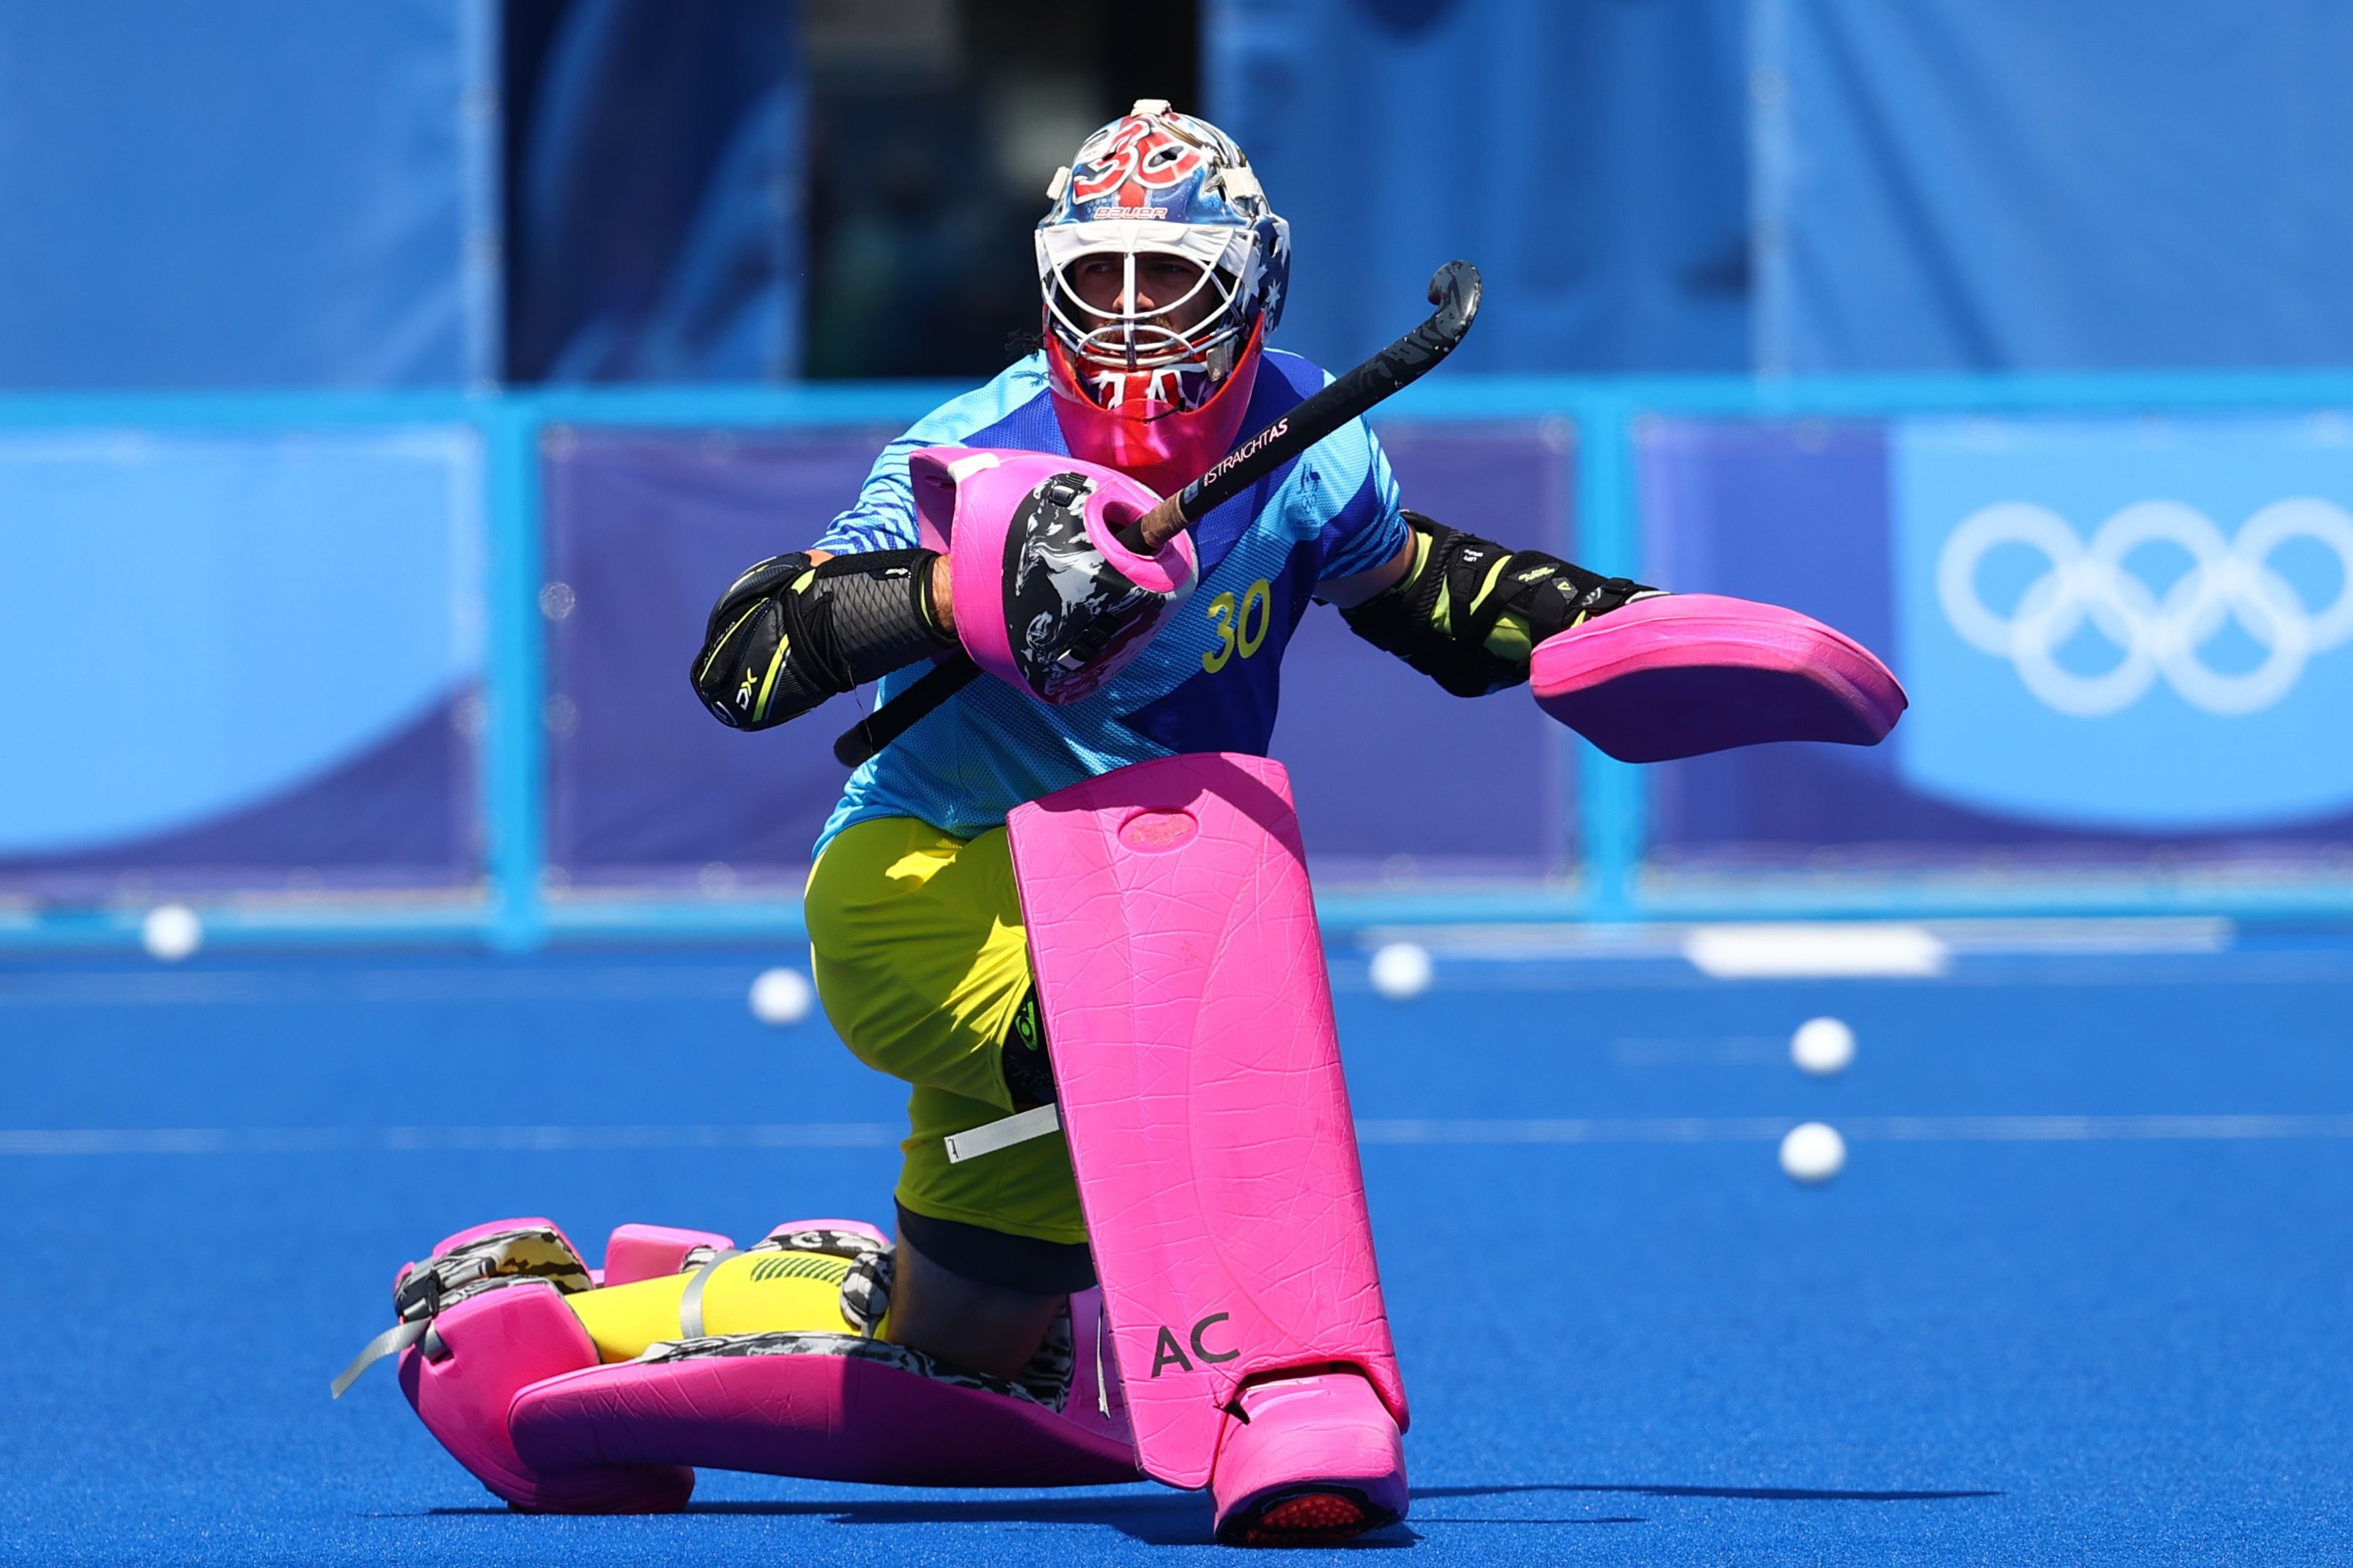 What type of field hockey goalie are you?